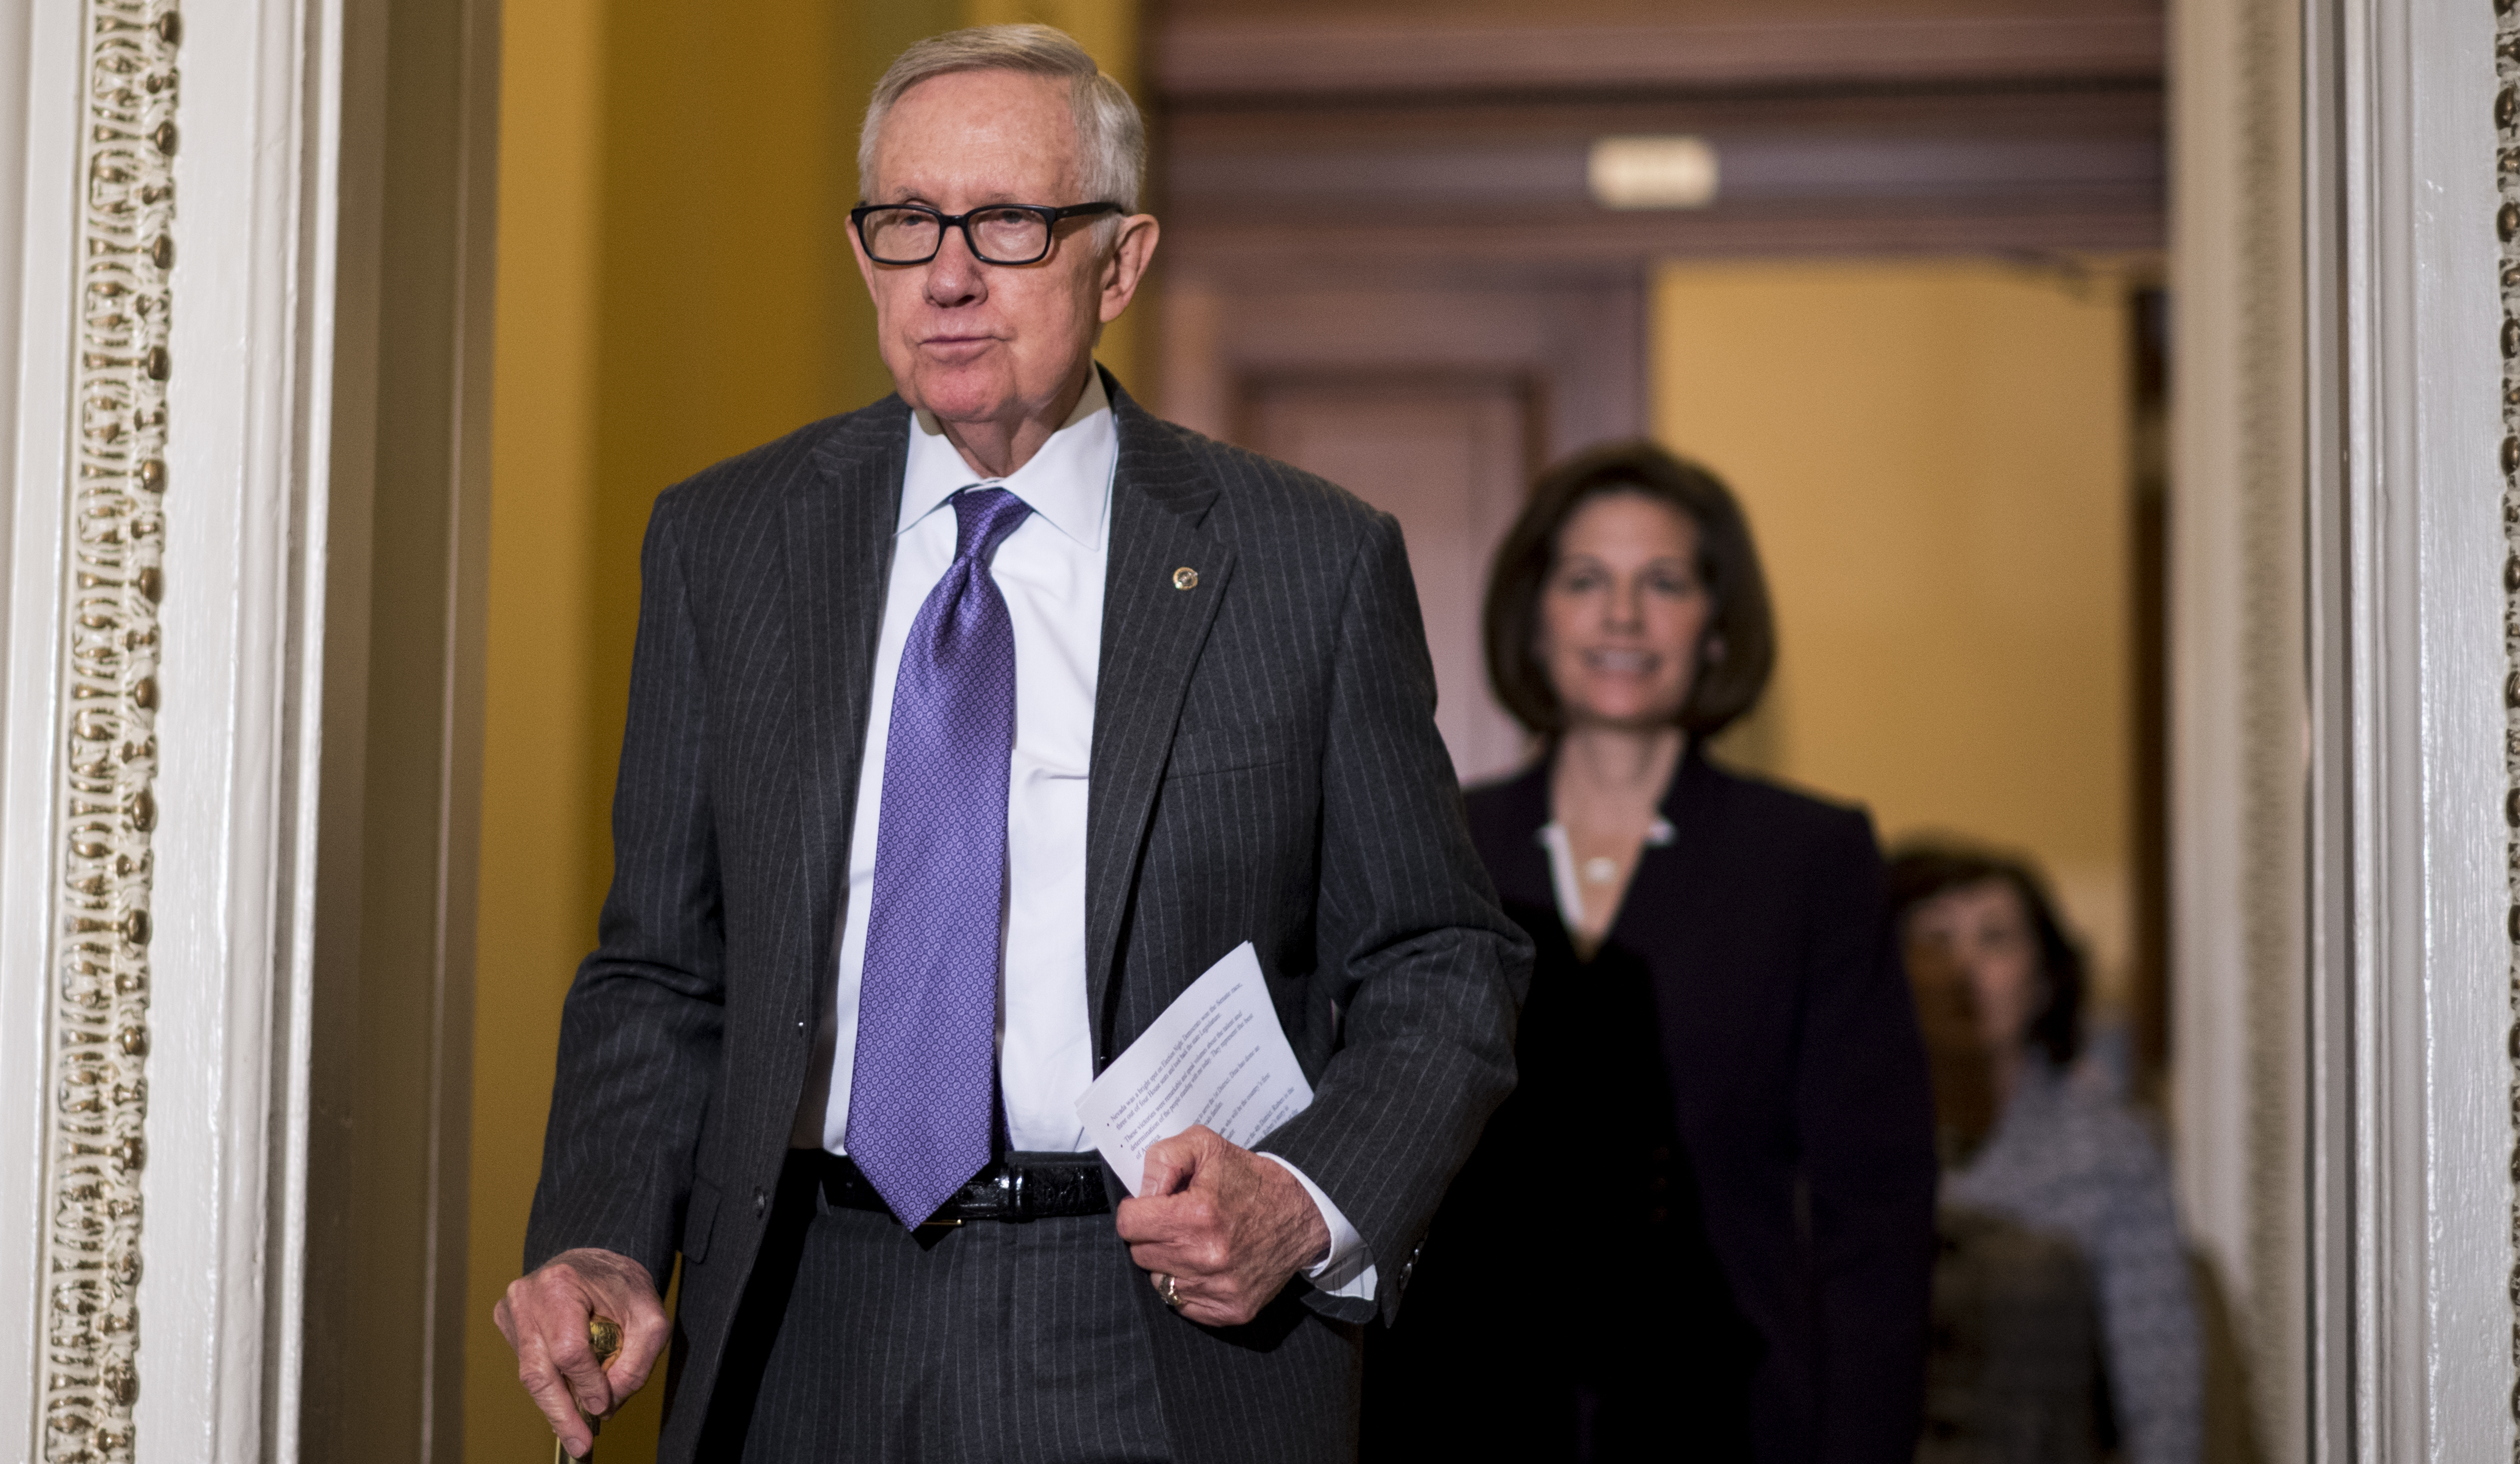 Senate Minority Leader Harry Reid, D-Nev., leads the Democrats of the Nevada delegation to the podium for a media availability in the U.S. Capitol on Monday, Nov. 14, 2016. (Bill Clark&mdash;CQ-Roll Call,Inc.)